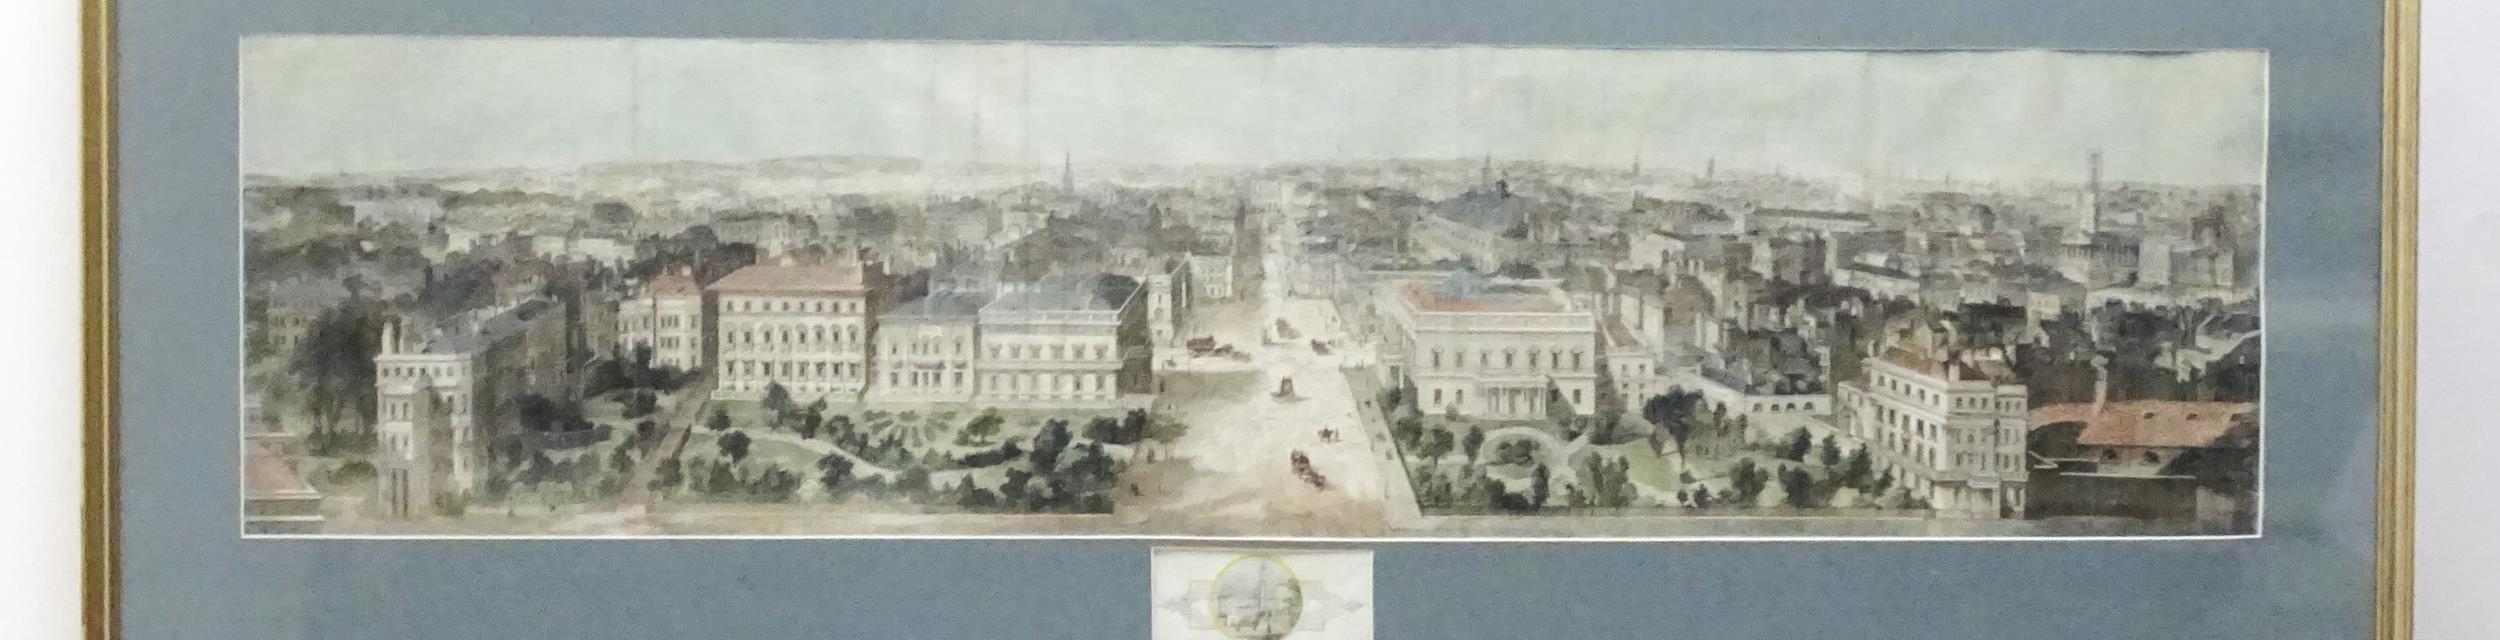 19th century, Hand coloured engraving, London in 1842 taken from the Summit of the Duke of York's - Image 4 of 5